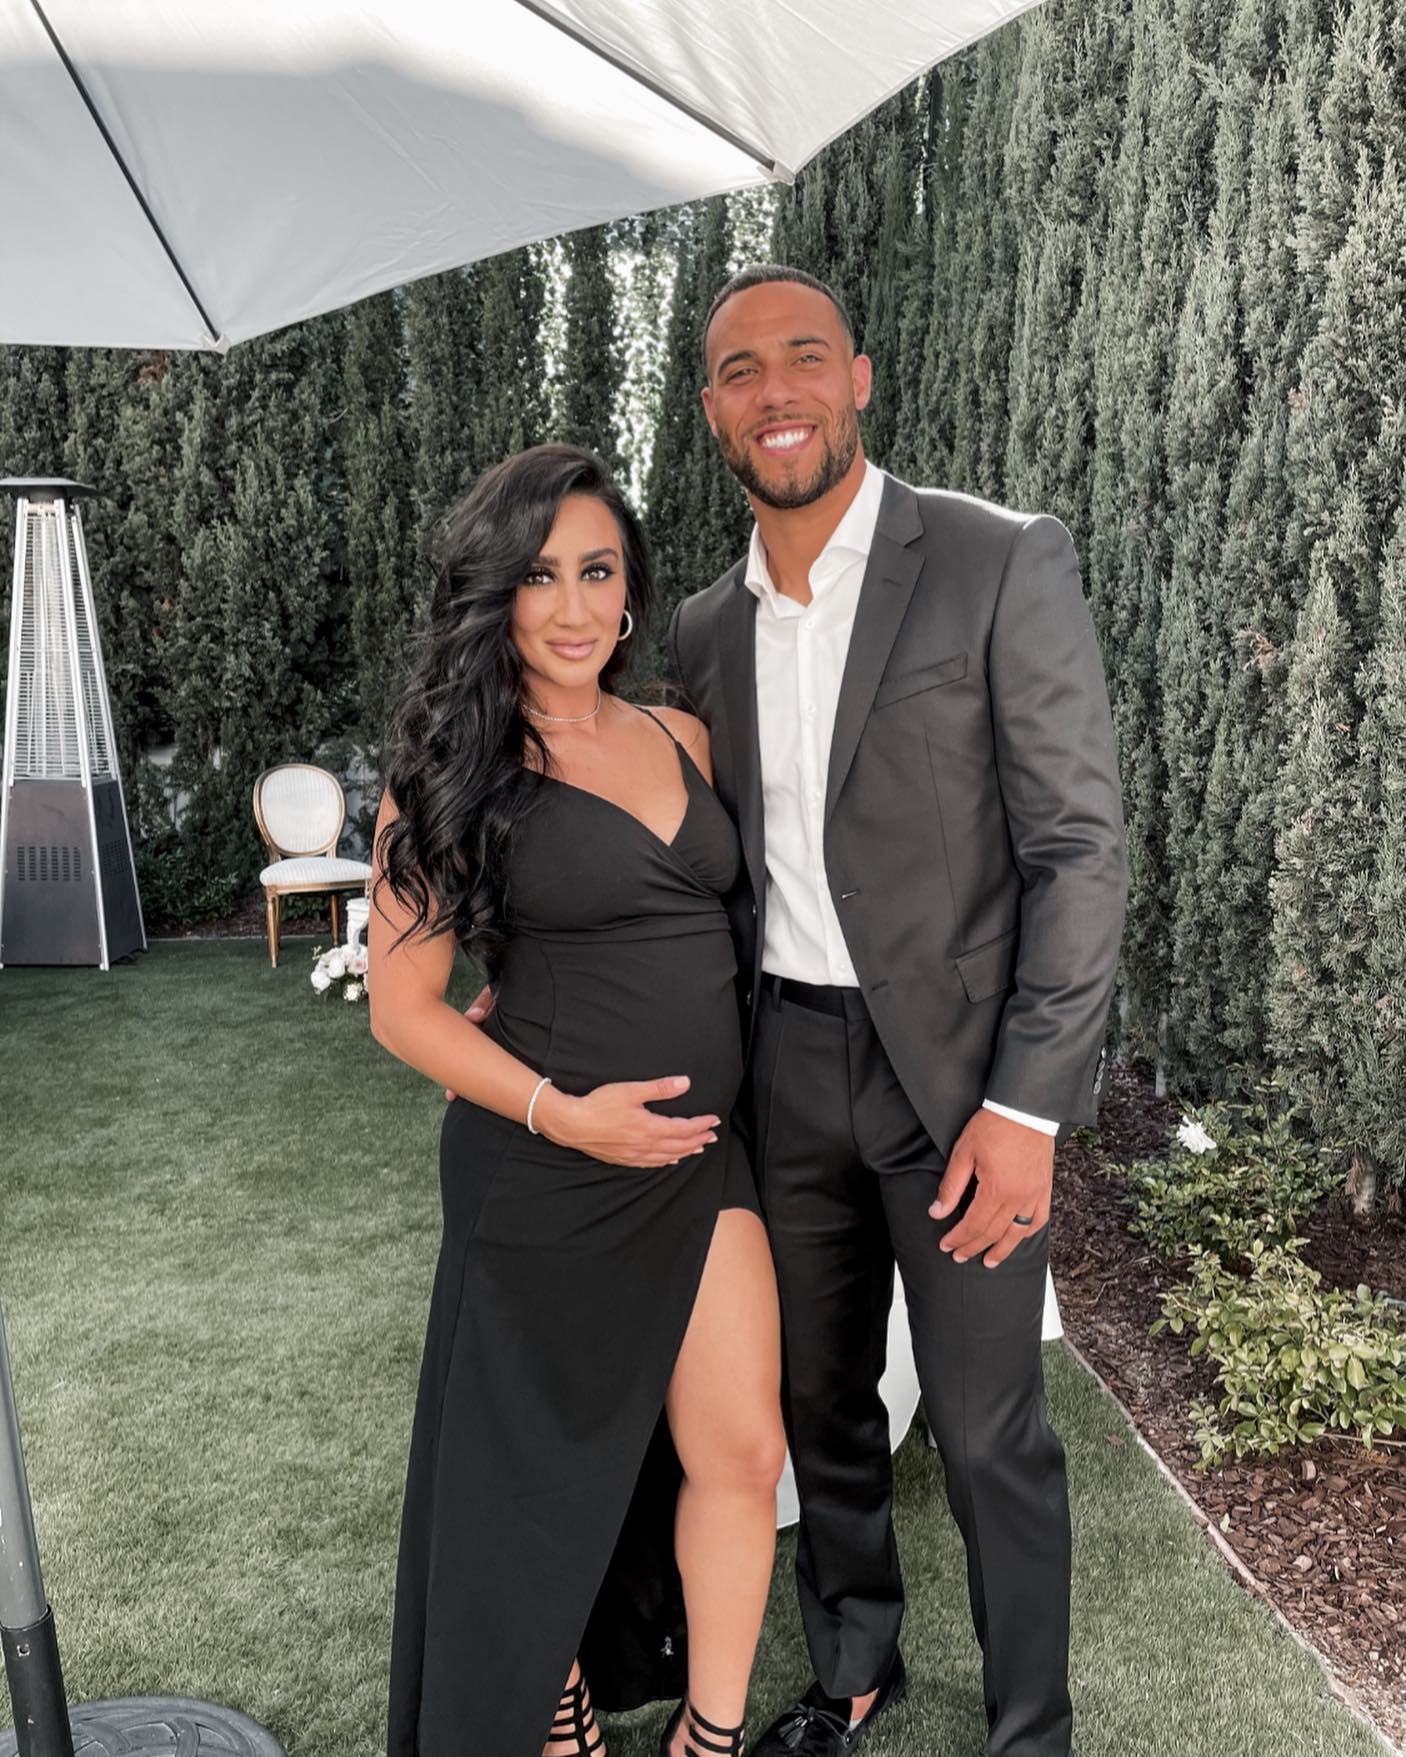 Amanda married Micah Hyde in 2018 - but his future with the Bills is now uncertain